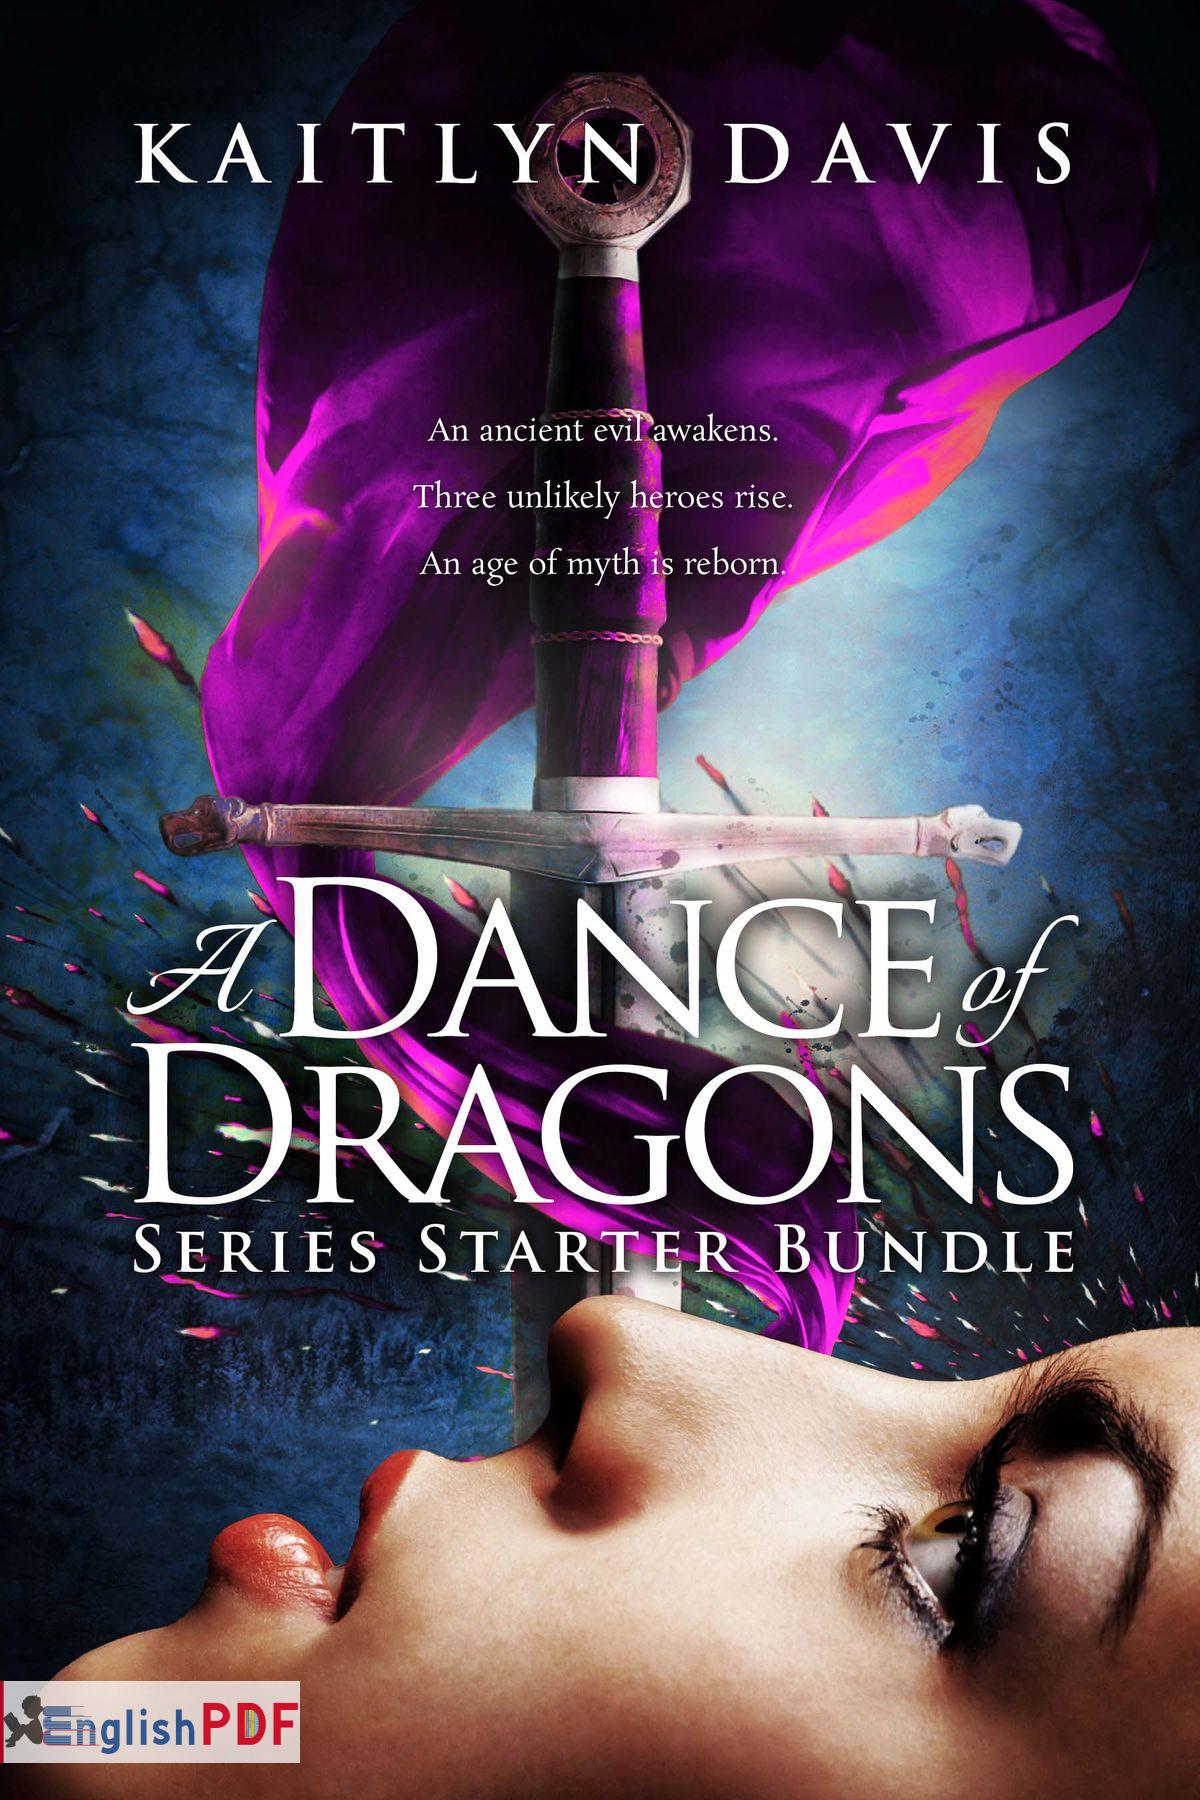  A Dance of Dragons By Kaitlyn Davis PDF Download